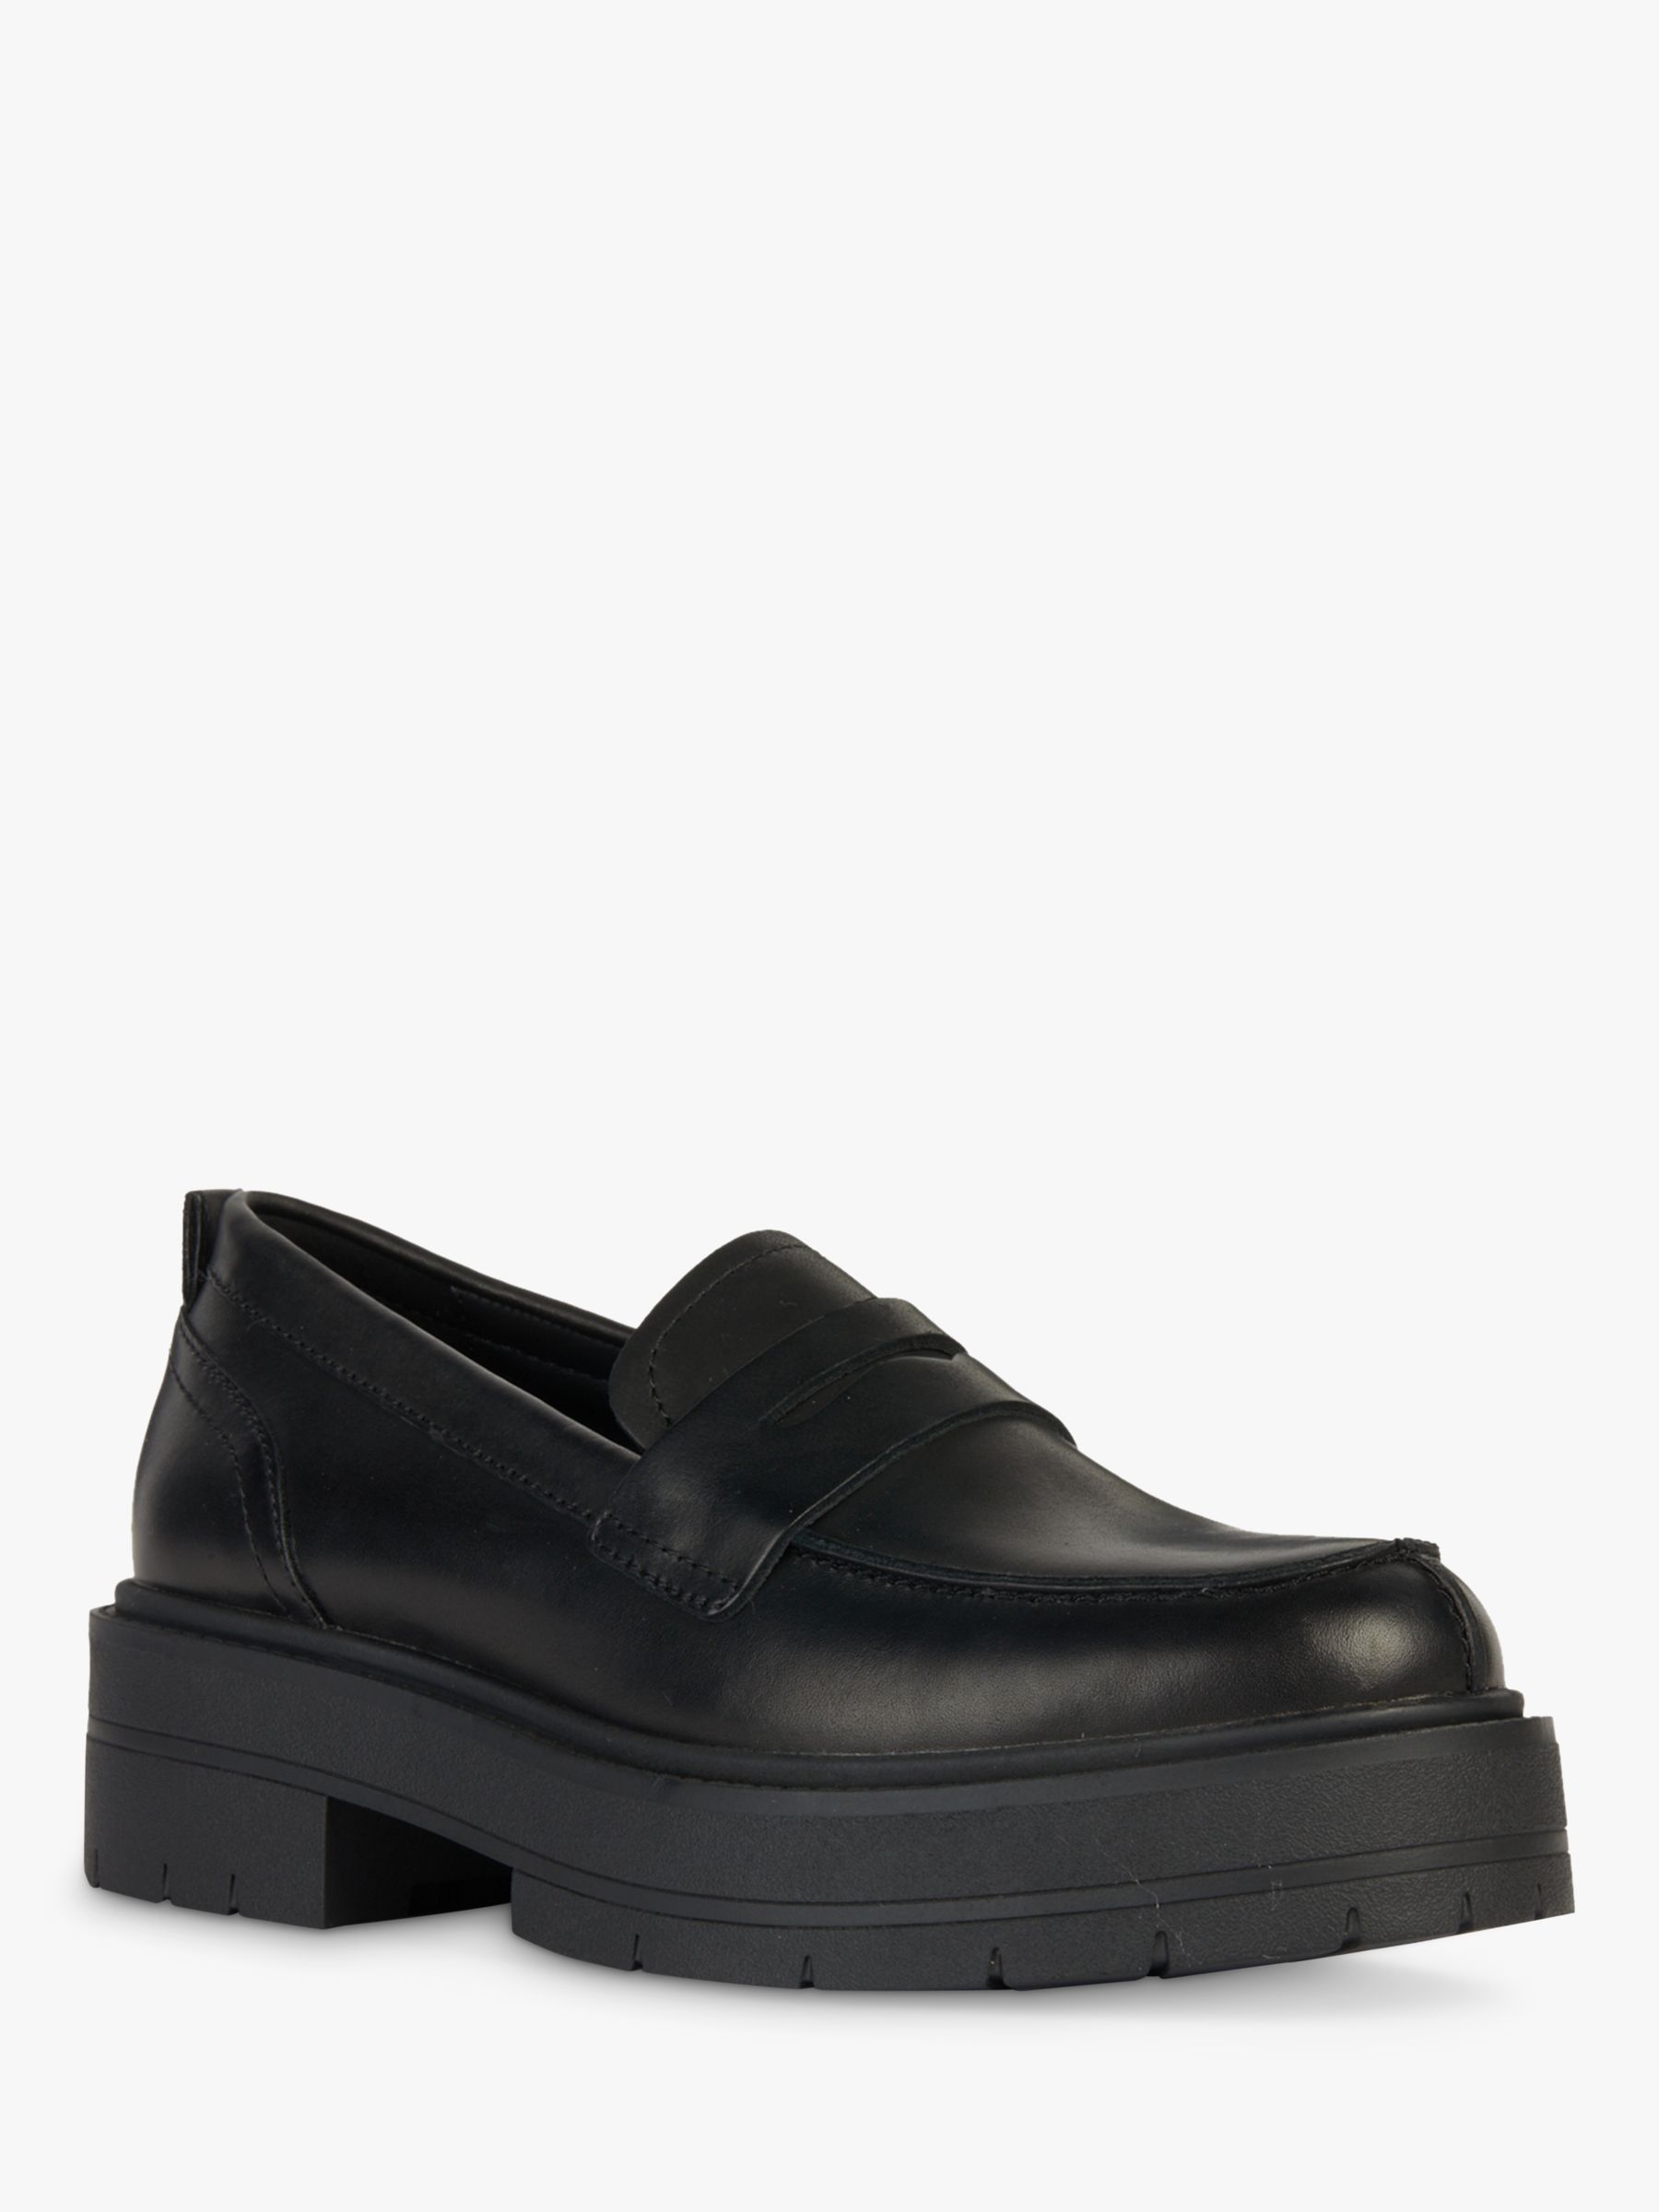 Geox D Spherica EC7 Leather Loafers, Black at John Lewis & Partners